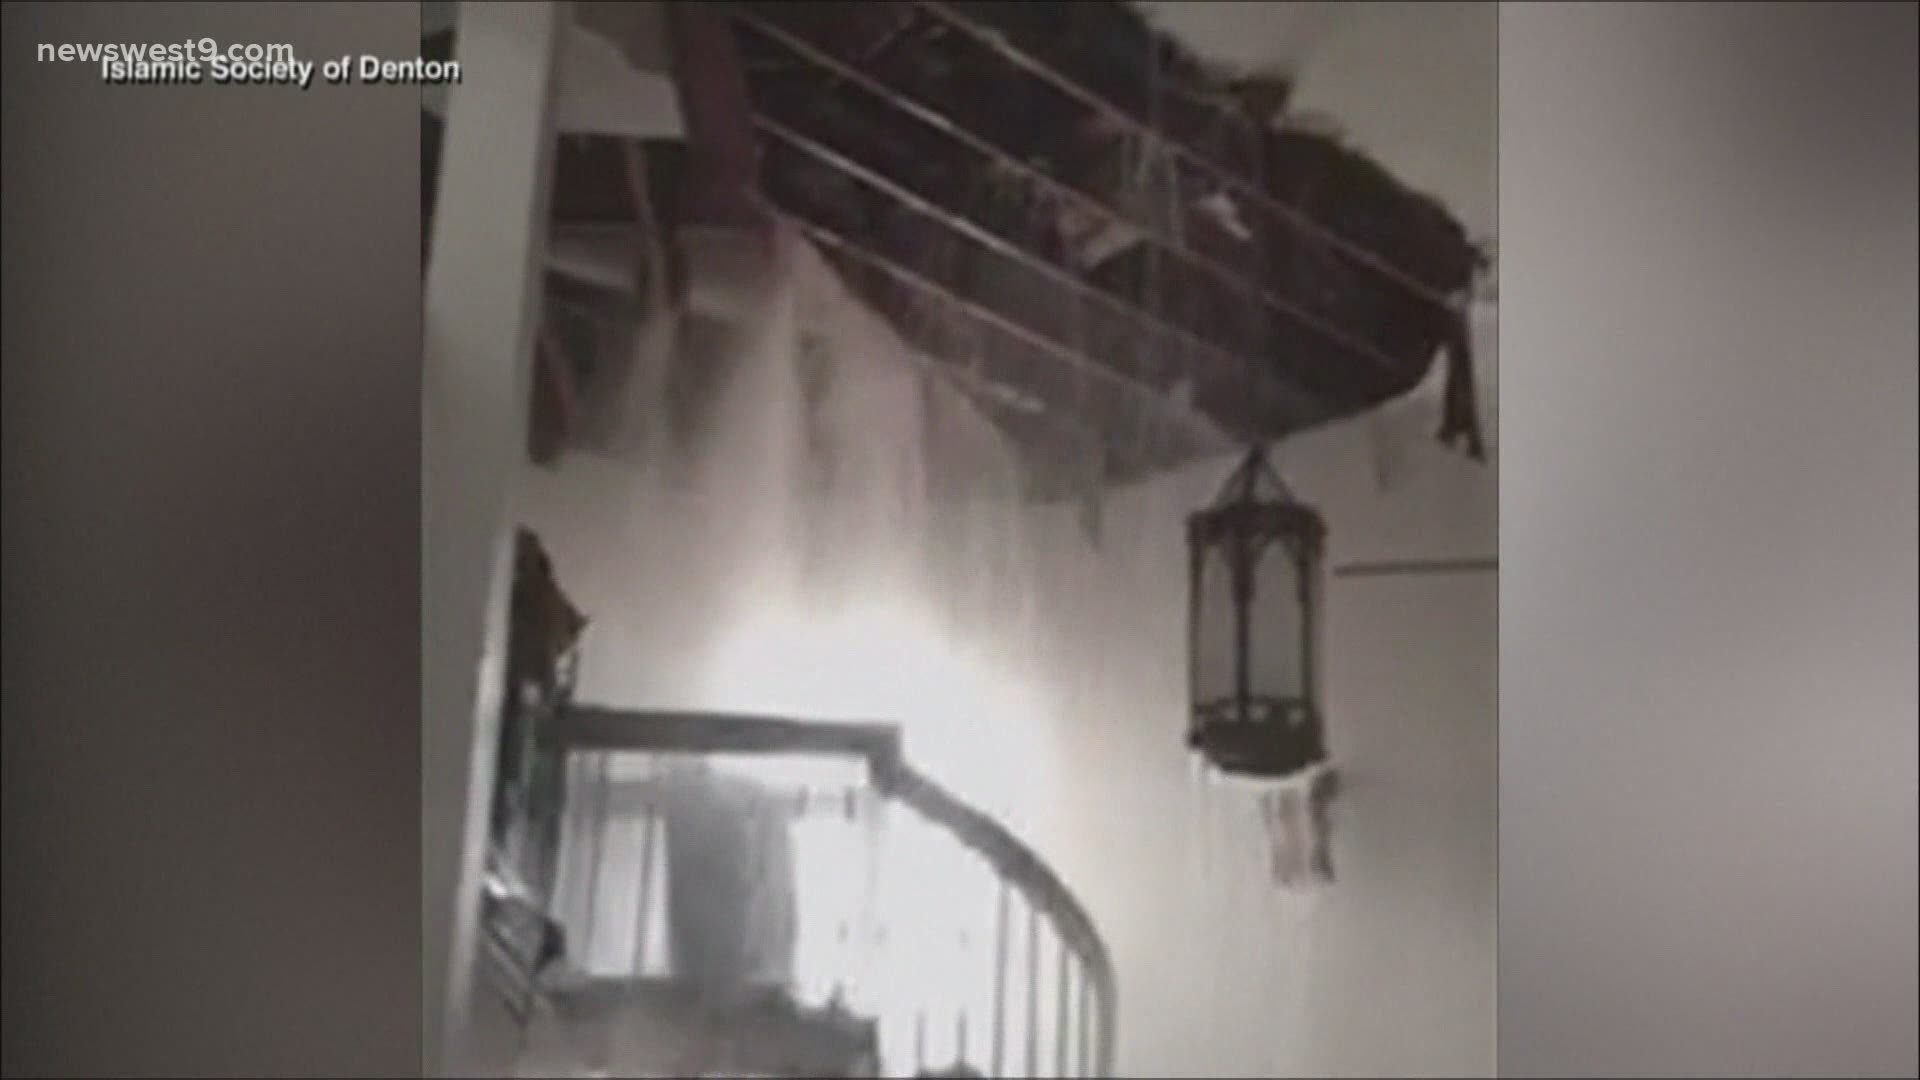 Many Texans experienced water damage from burst pipes following the intense cold weather.